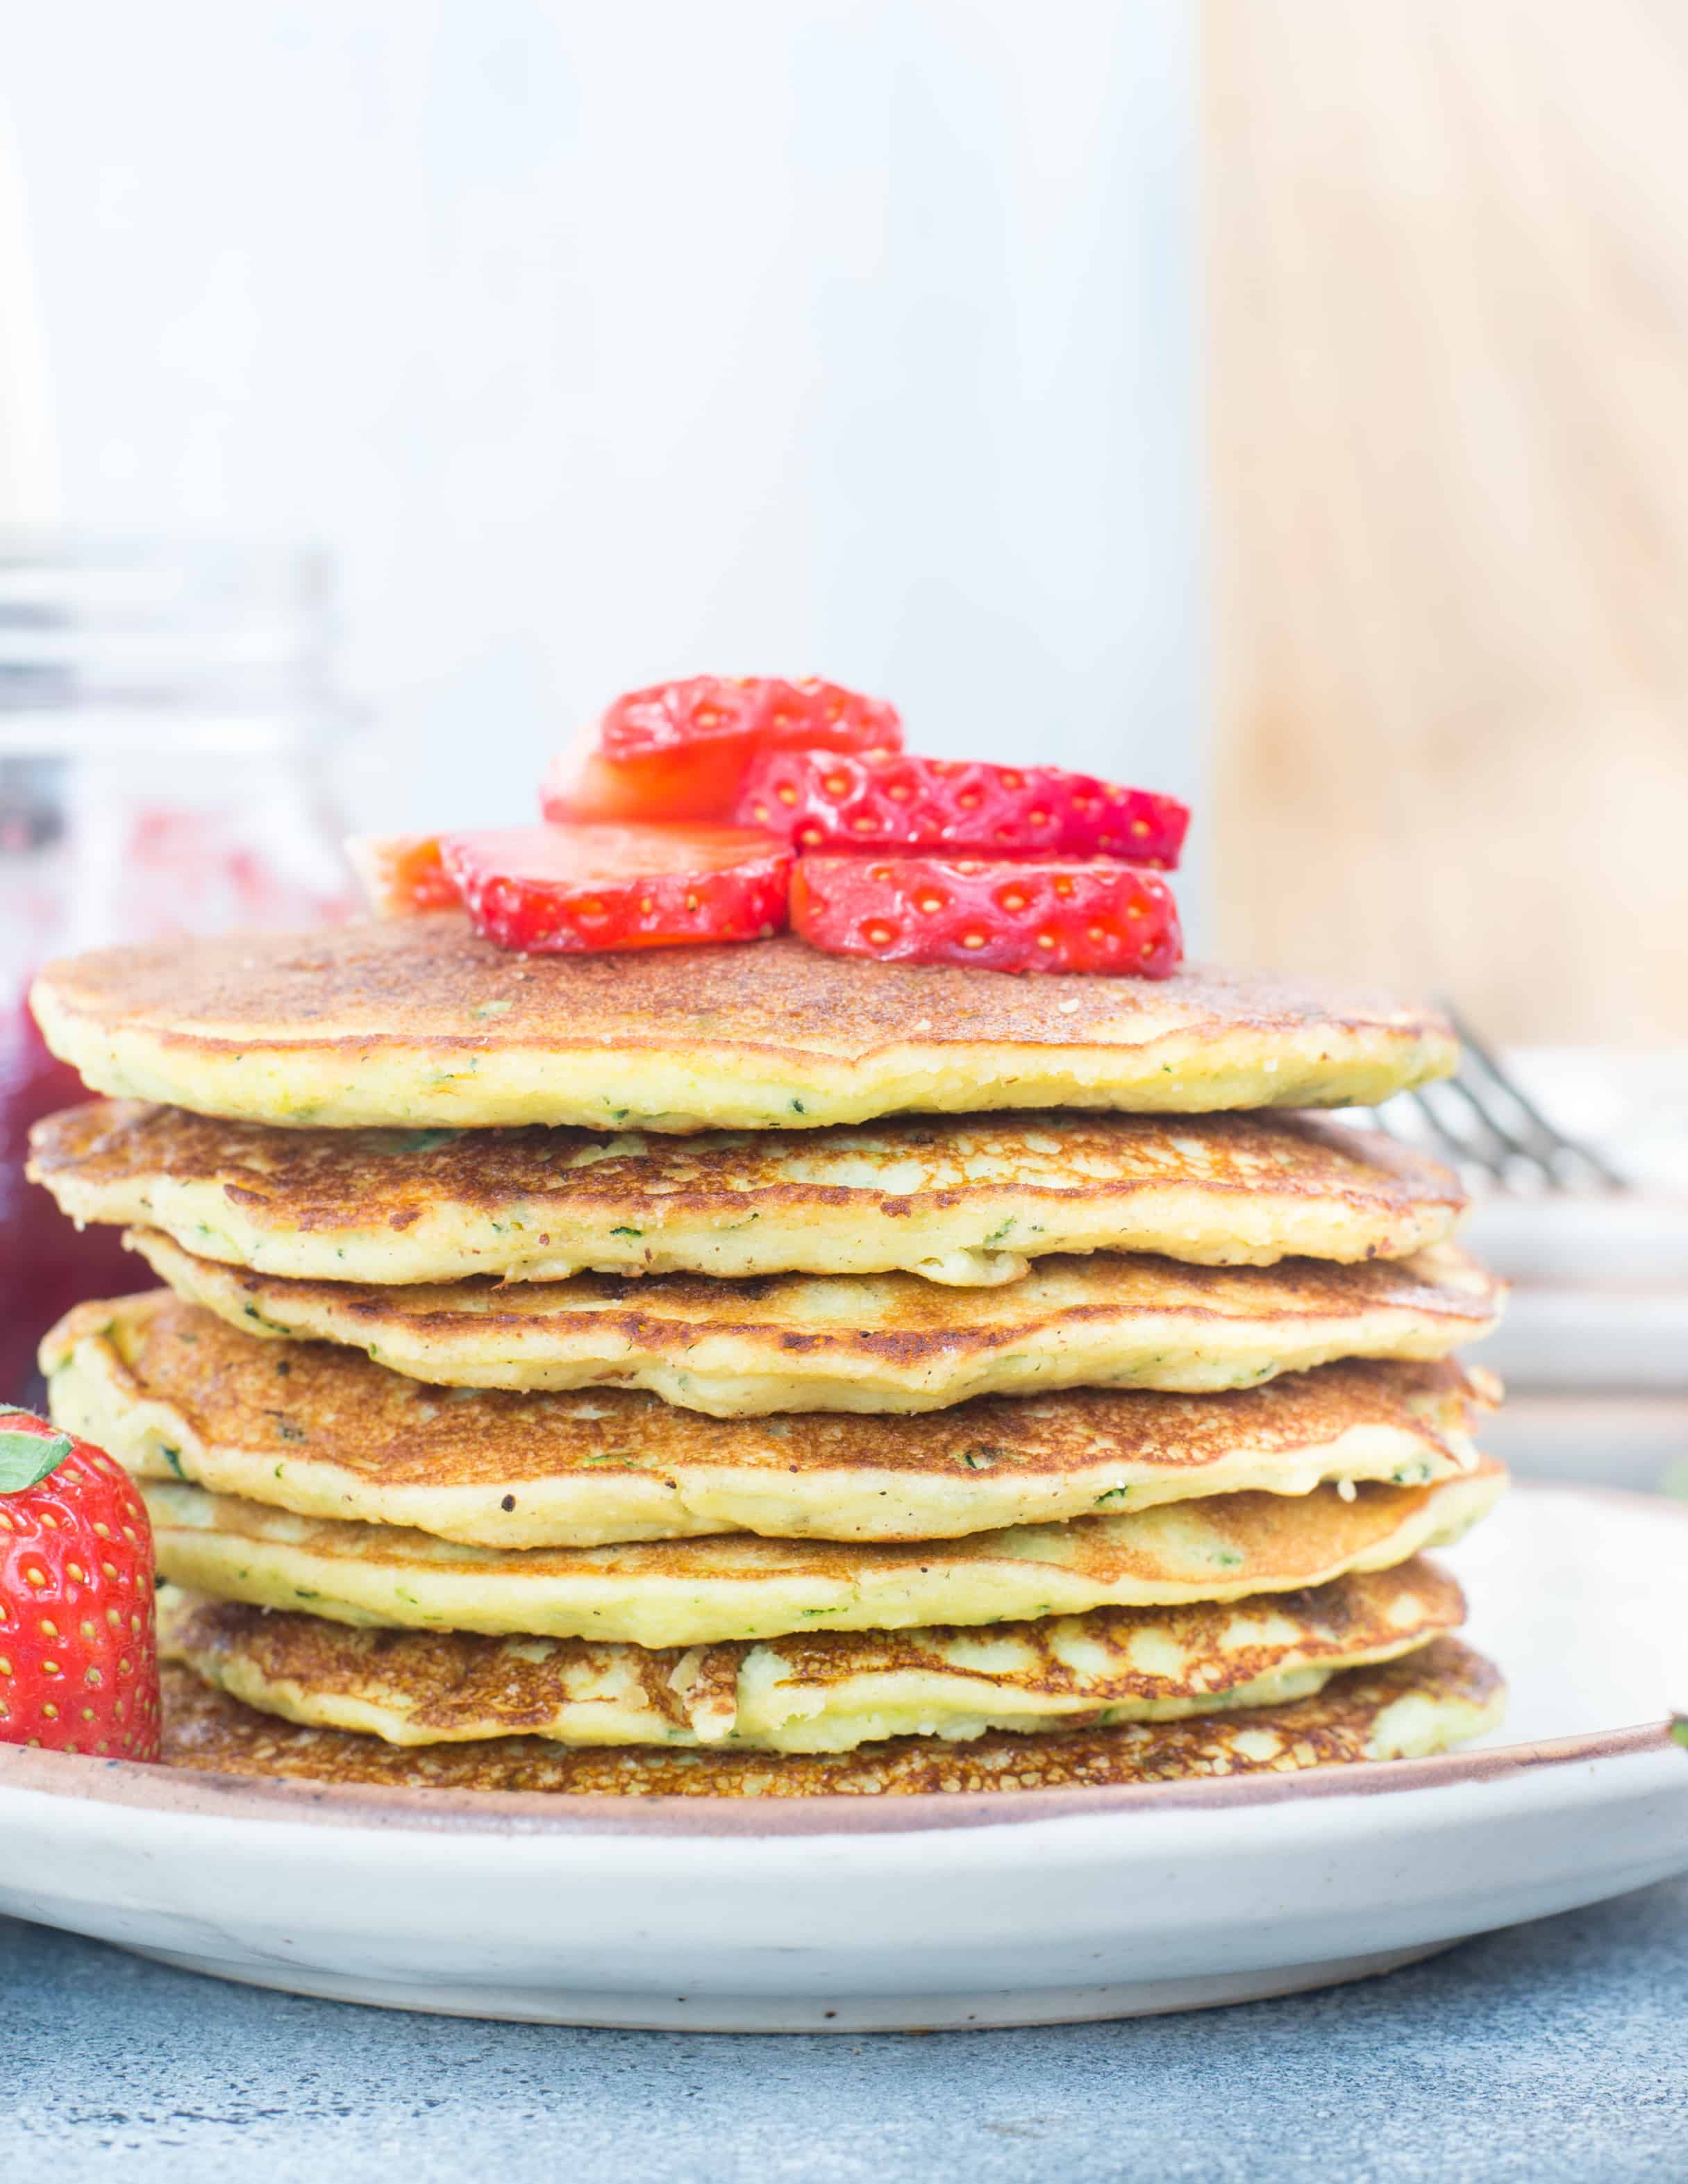 These  Low Carb Coconut Flour Pancakes with zucchini are fluffy, delicious and Keto friendly. Top these pancakes with fresh berries or Honey(Non-Keto) for a delicious breakfast.